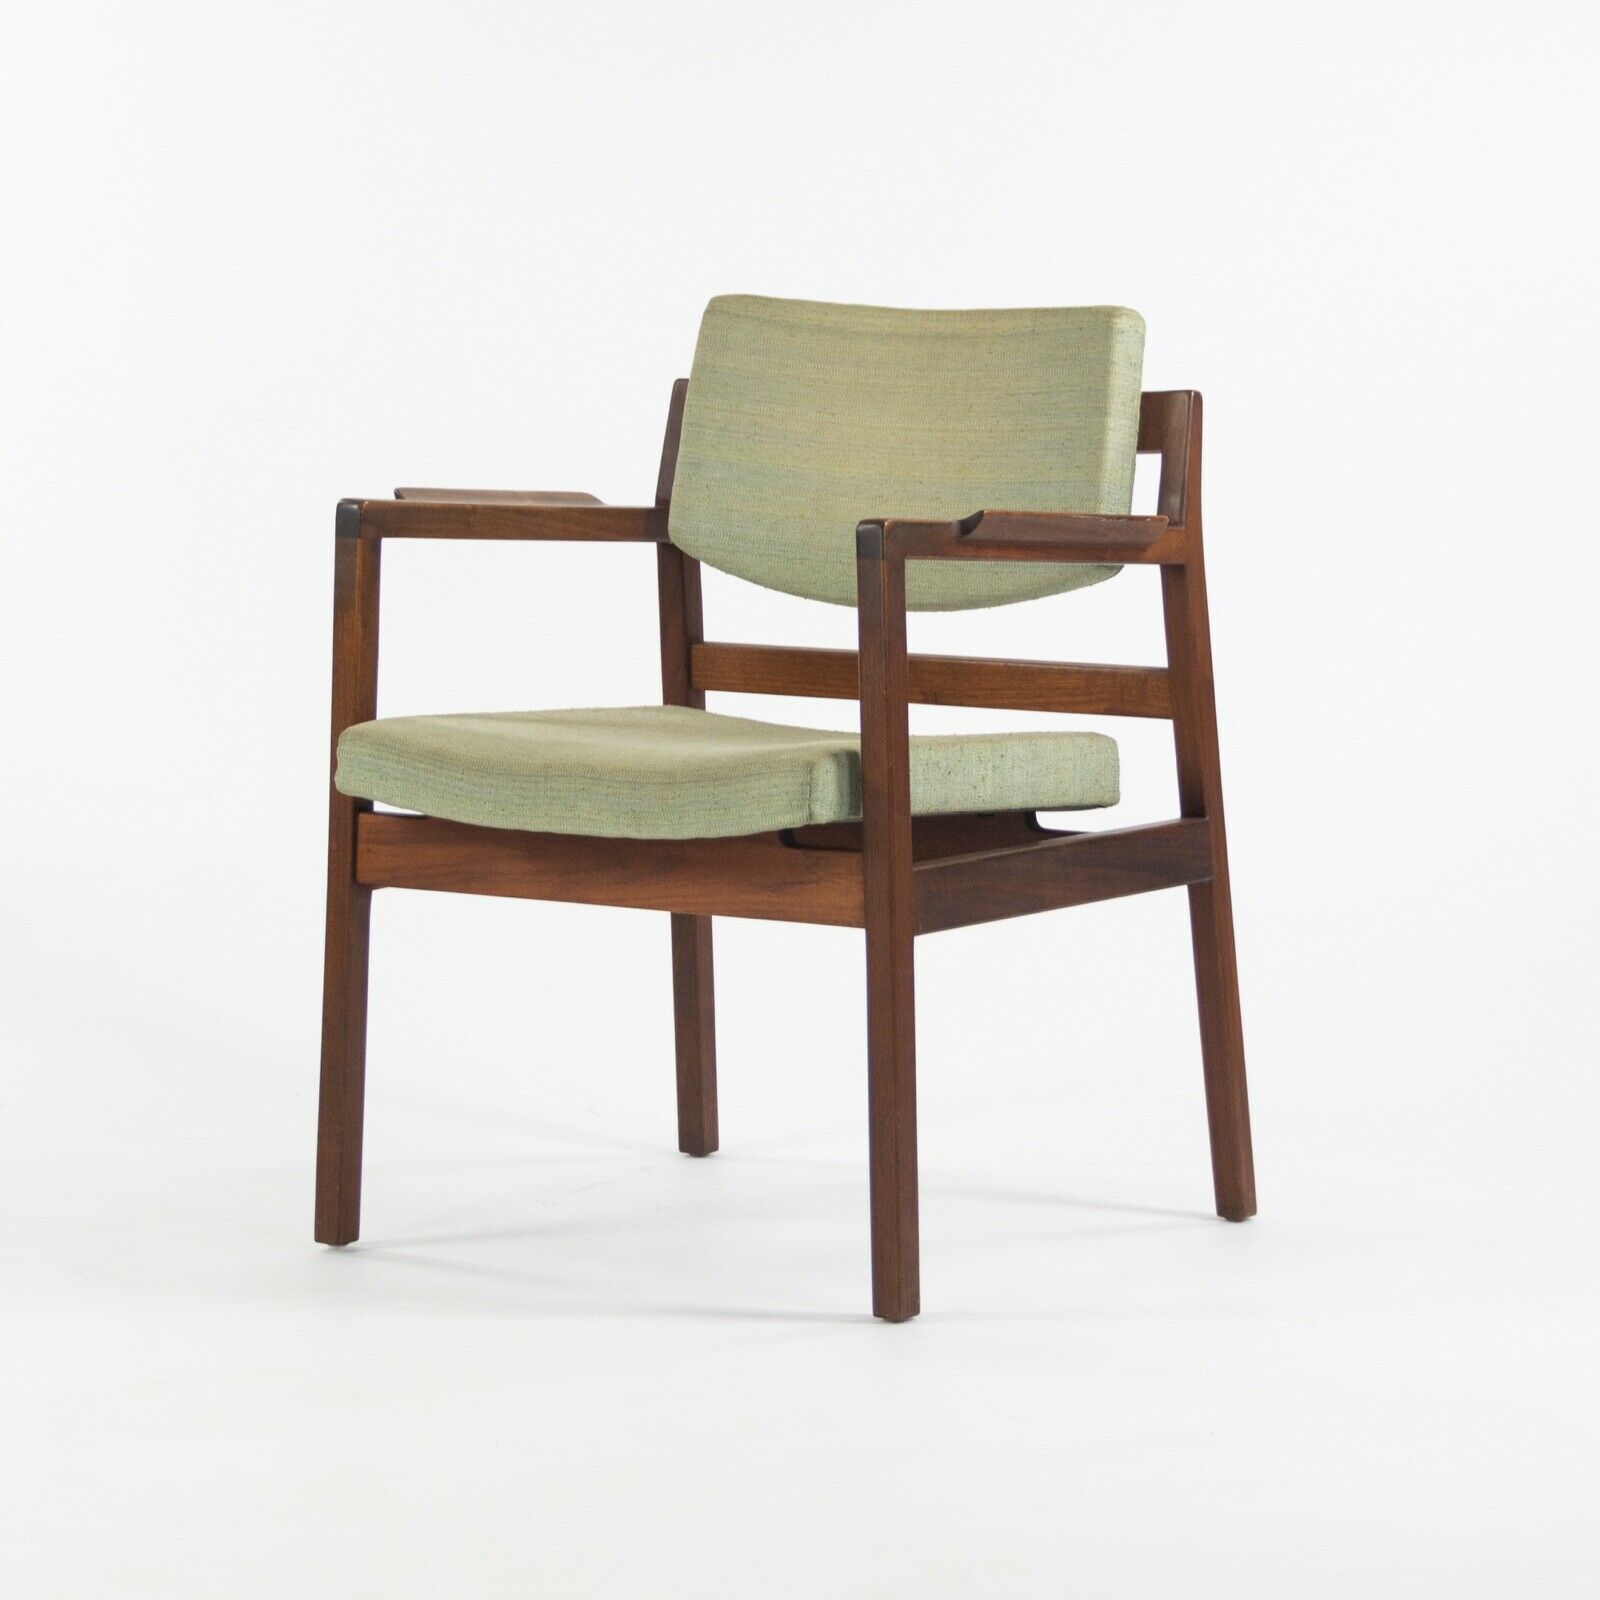 1960s Jens Risom Design Inc Pair of Dining Arm Chairs in Green Fabric